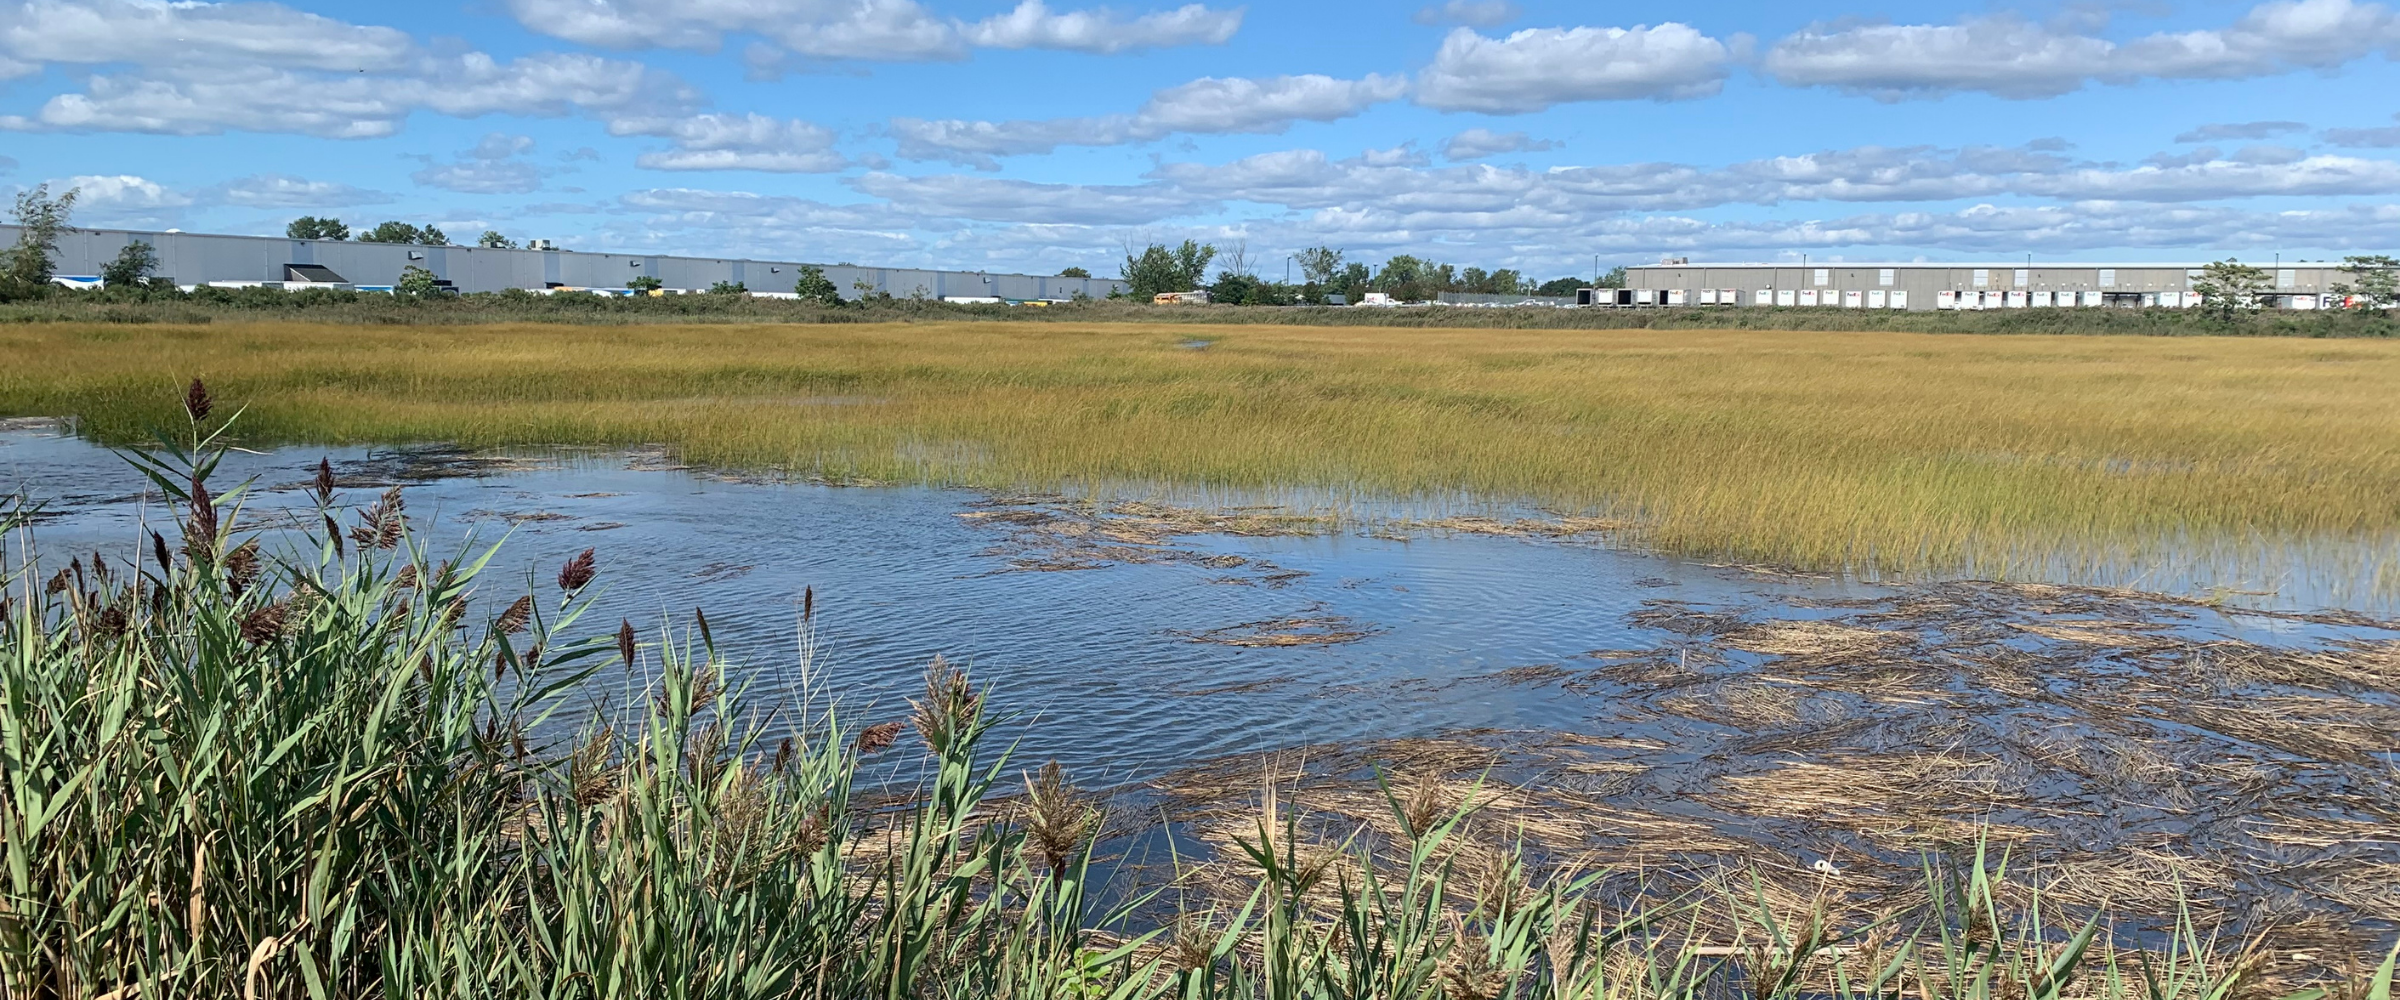 Great Meadows Marsh. You can see water and grasses and buildings in the background.